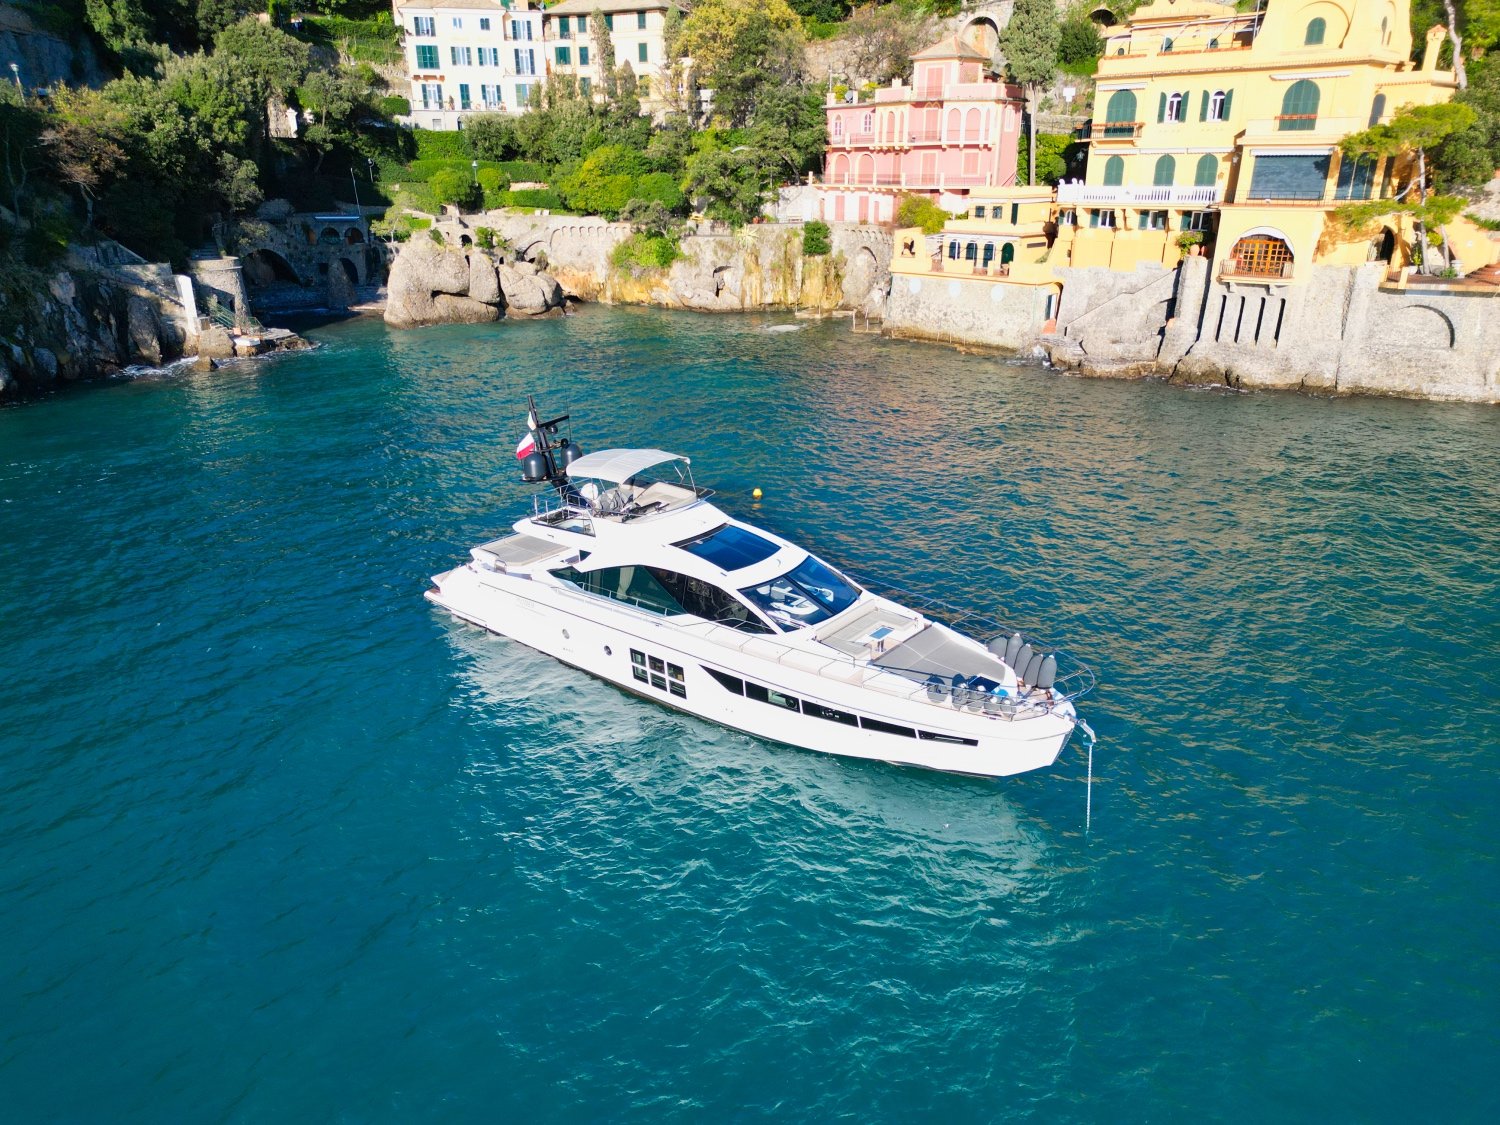 Azimut S7 Yachts for Sale | Used Azimut S7 Yacht Price